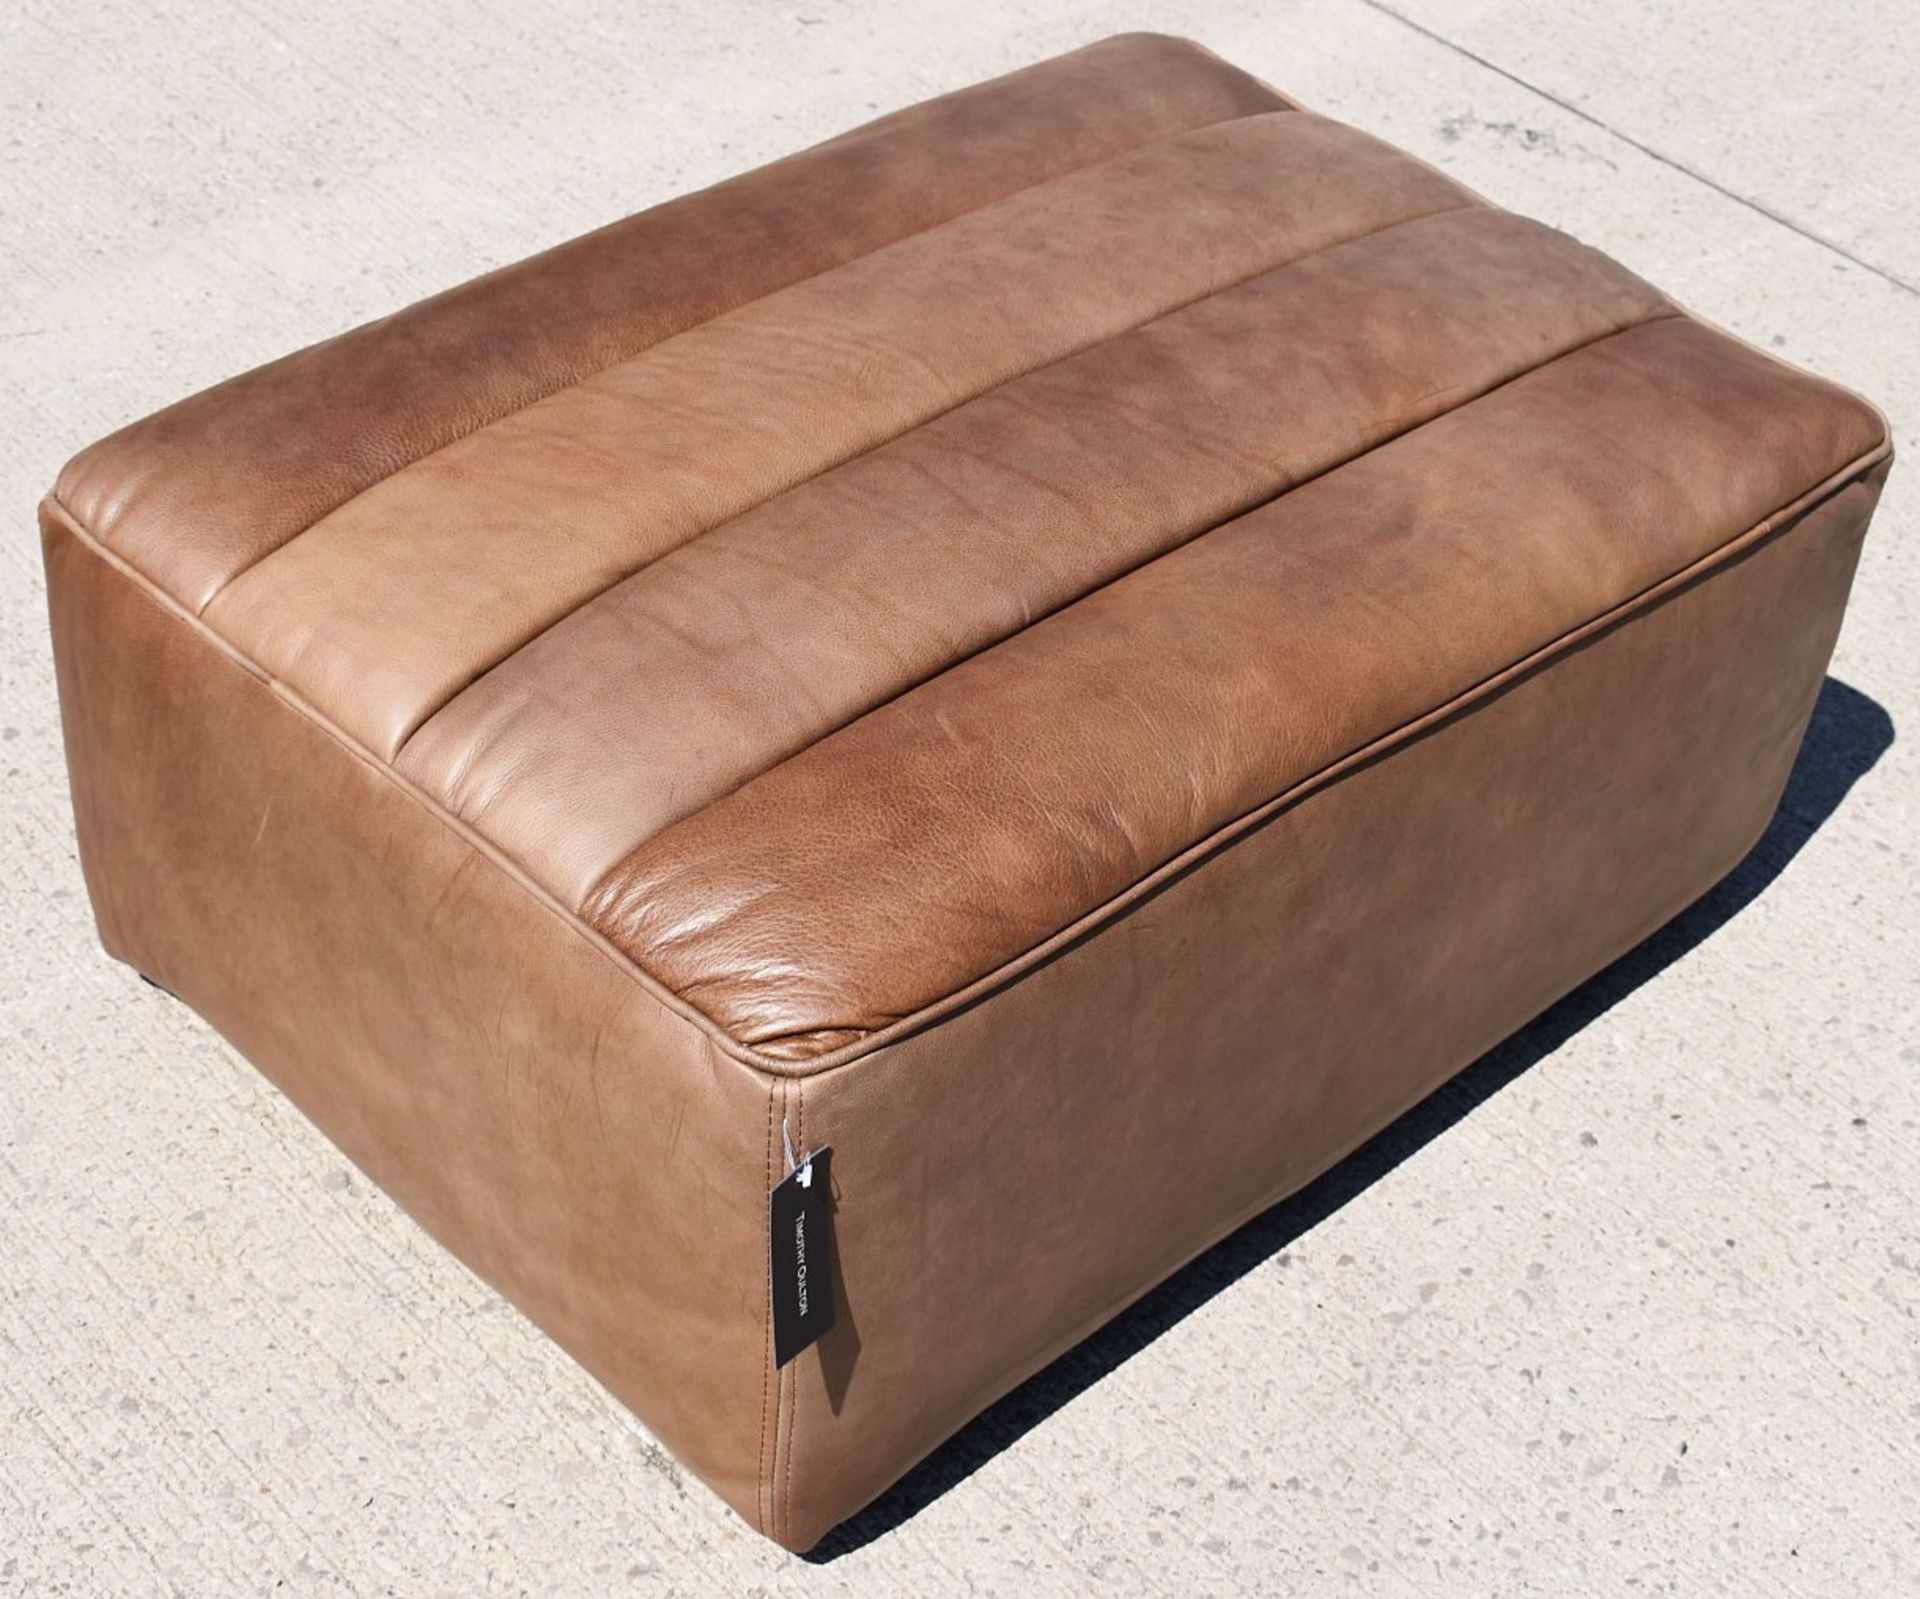 1 x TIMOTHY OULTON 'Shabby' Luxury Upholstered Footstool in a Distressed Brown Leather - RRP £1,500 - Image 2 of 13